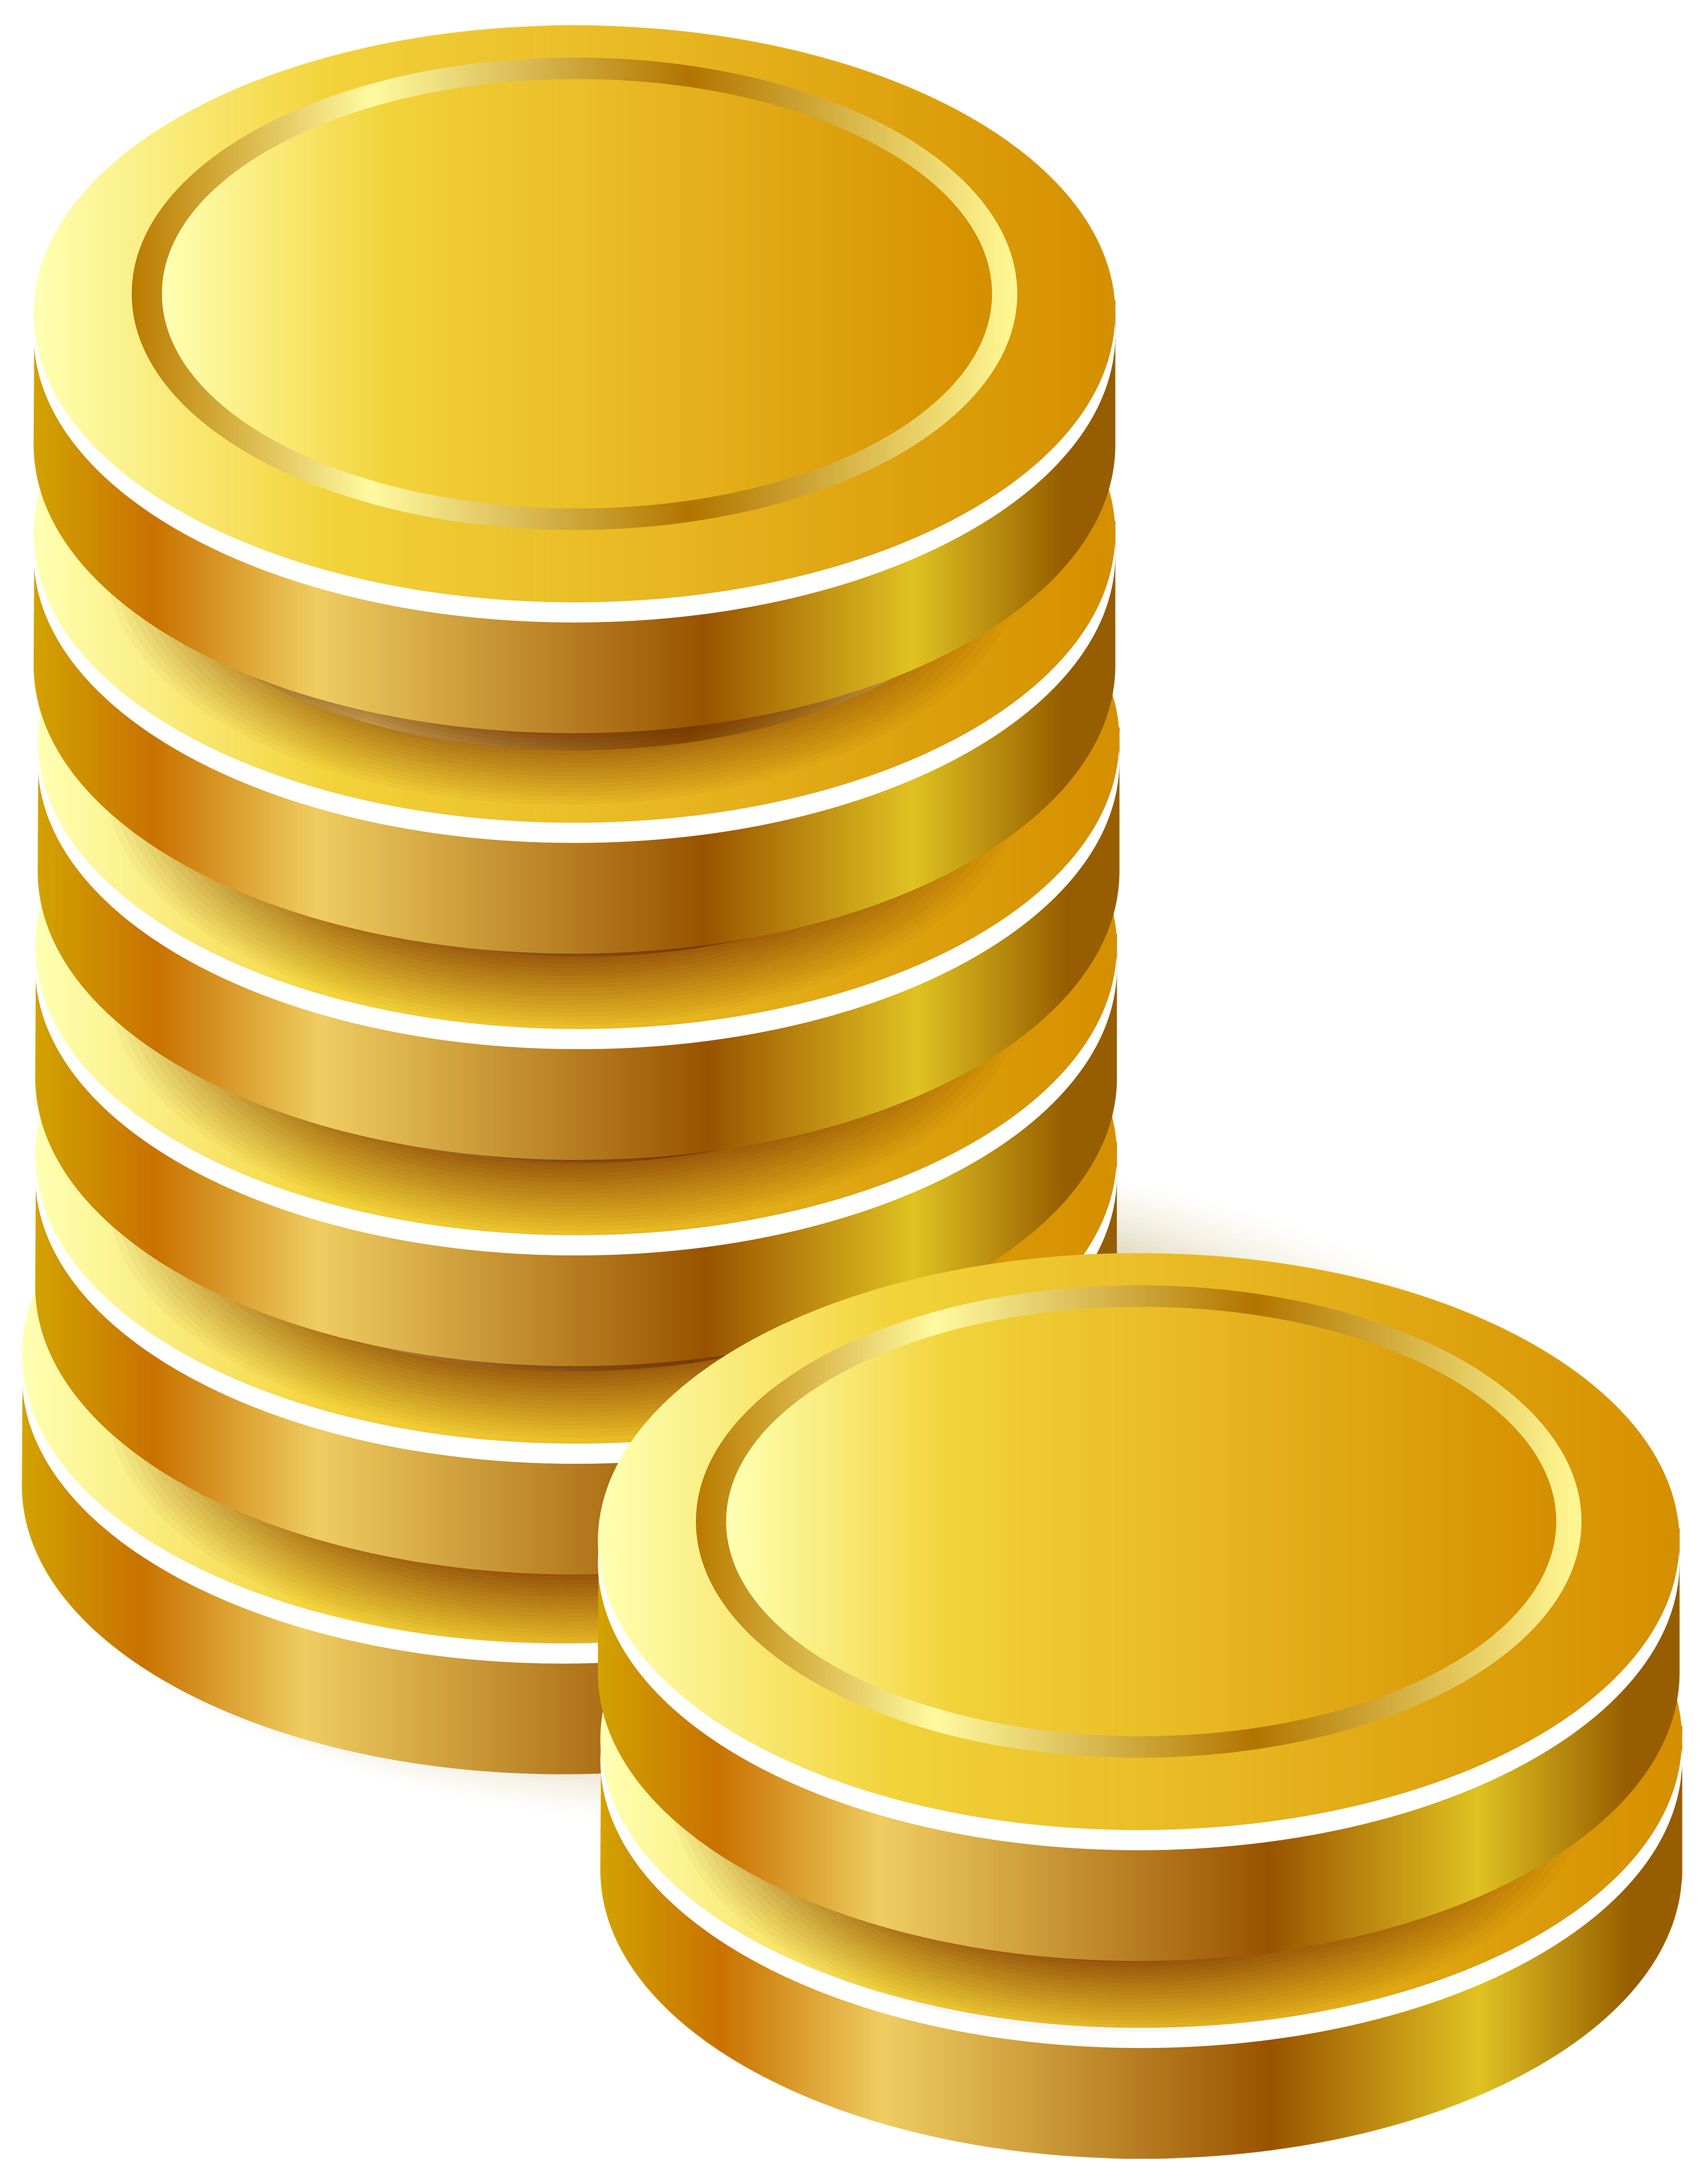 Coin PNG HD - 126470